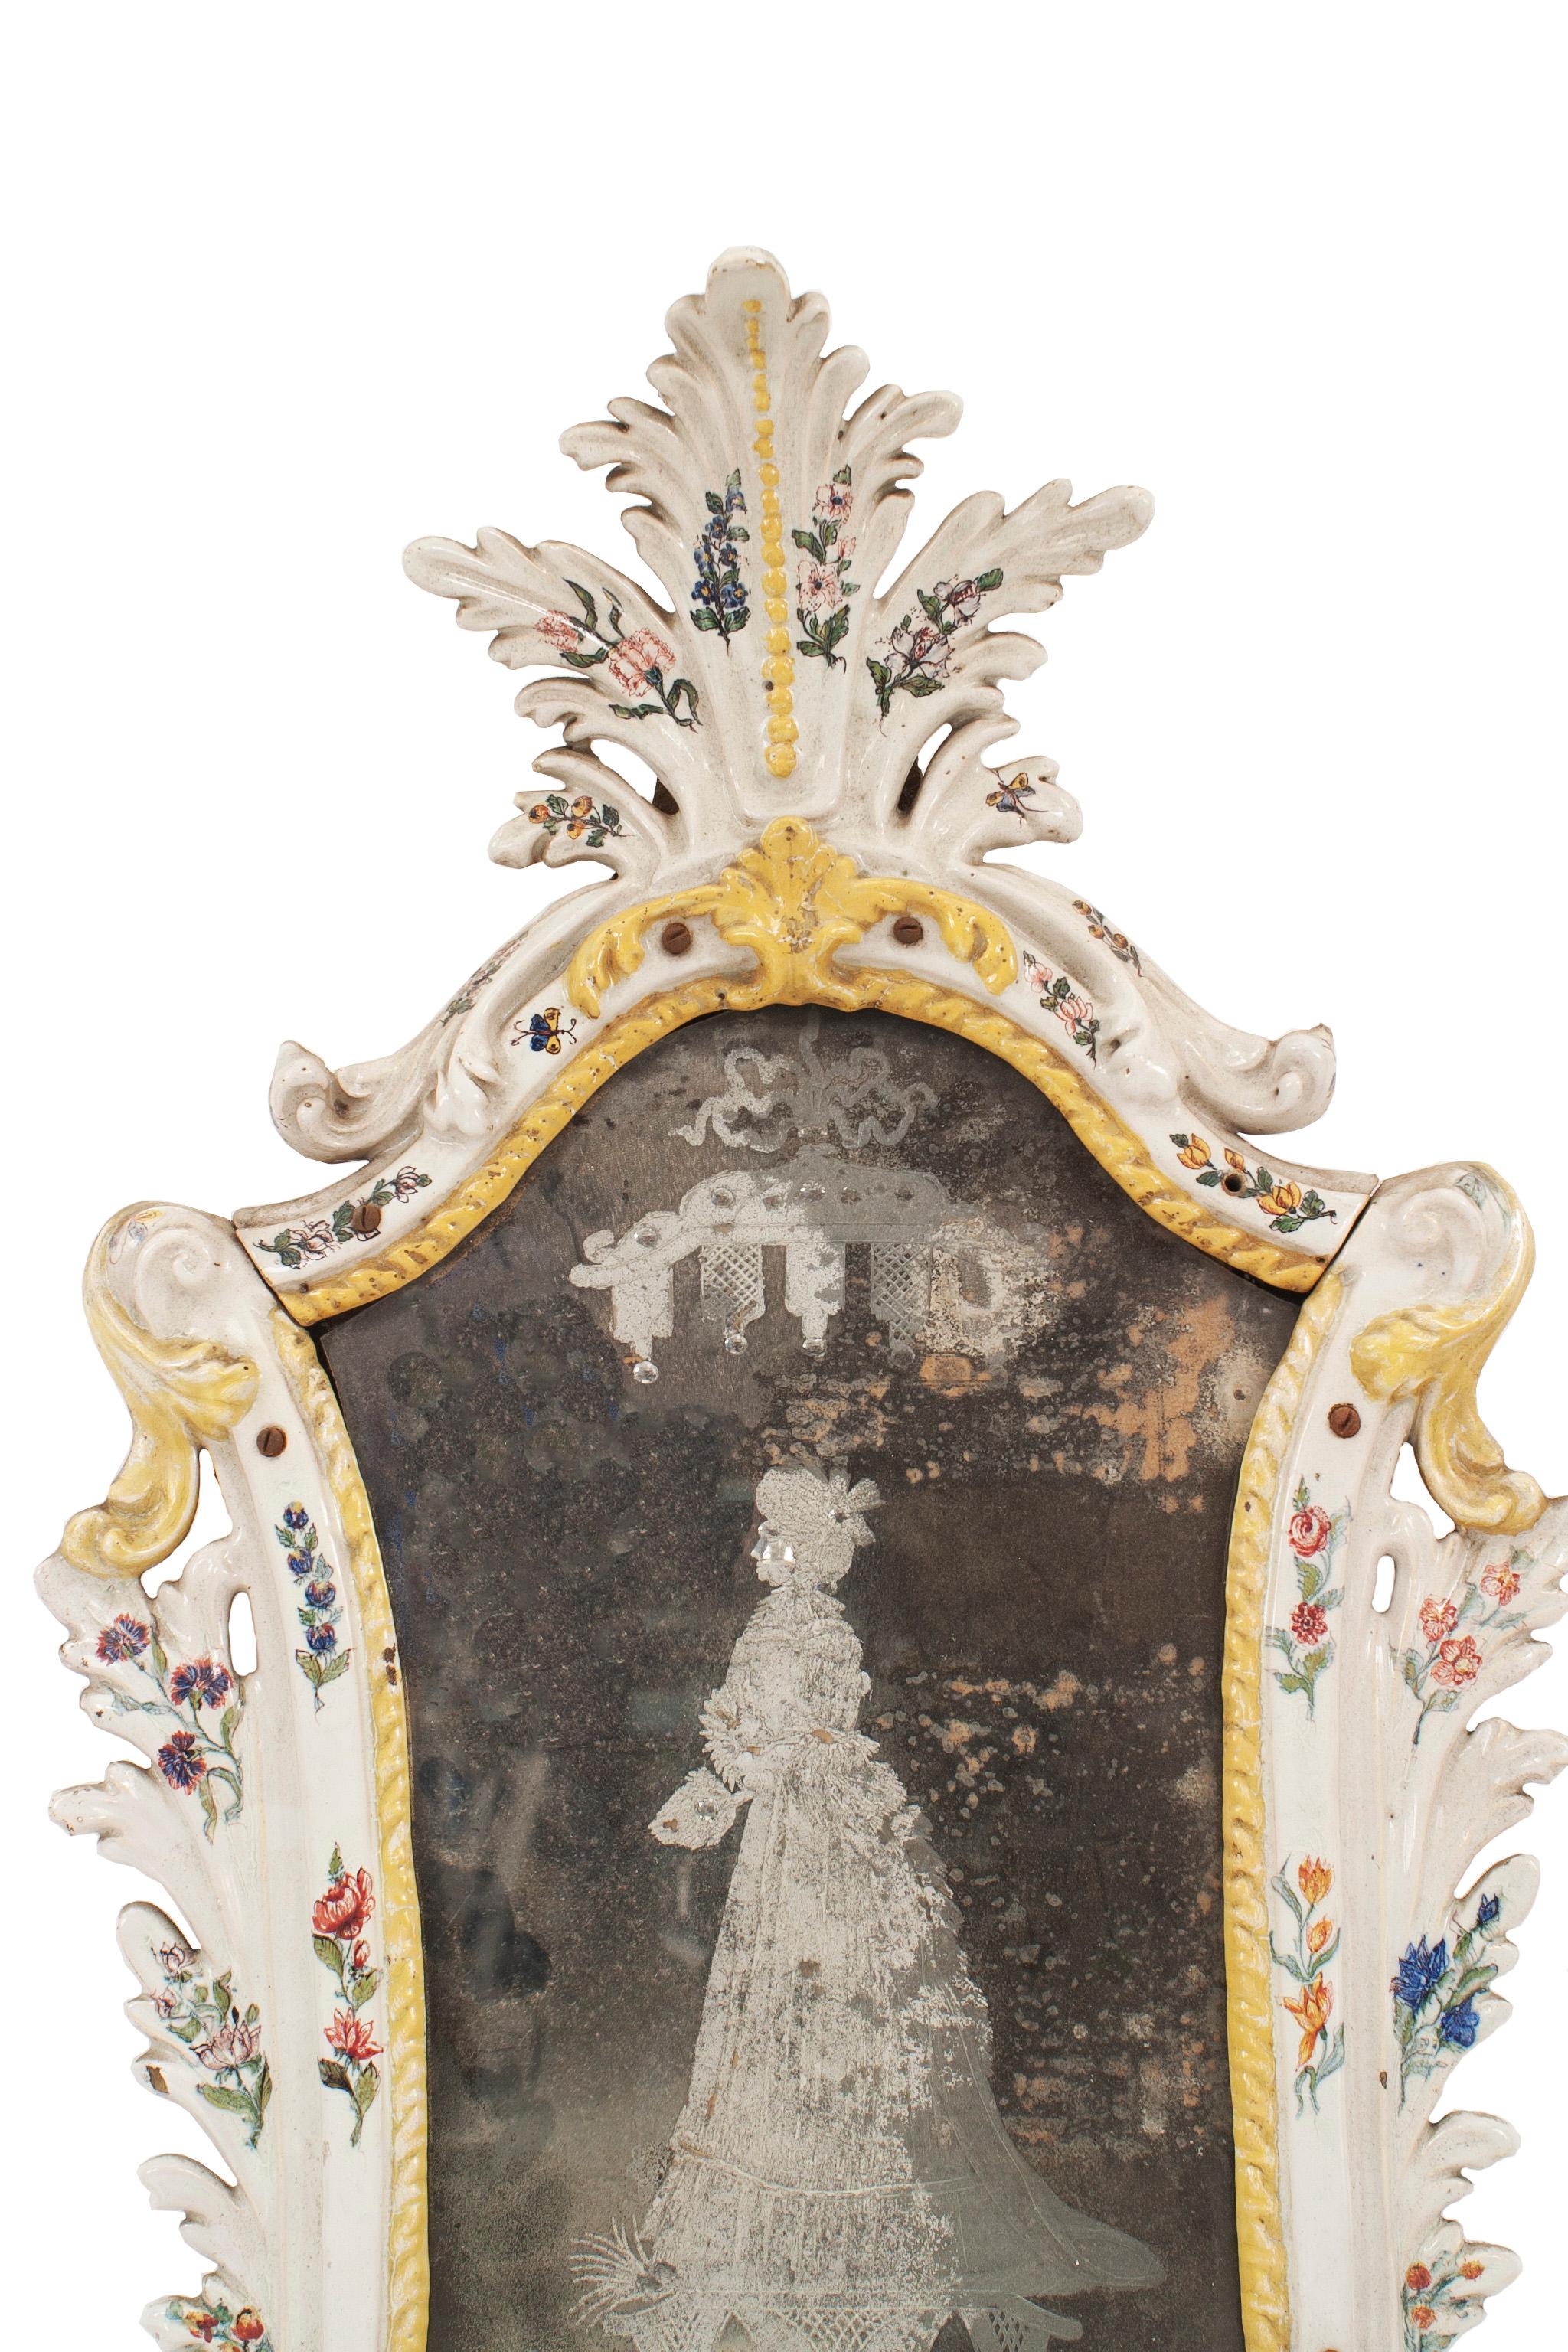 Continental (possibly German 19th century) white porcelain keystone shaped wall mirror with yellow trim and floral decoration having a floral pediment and etched glass with a figure (similar to VCG004).

  